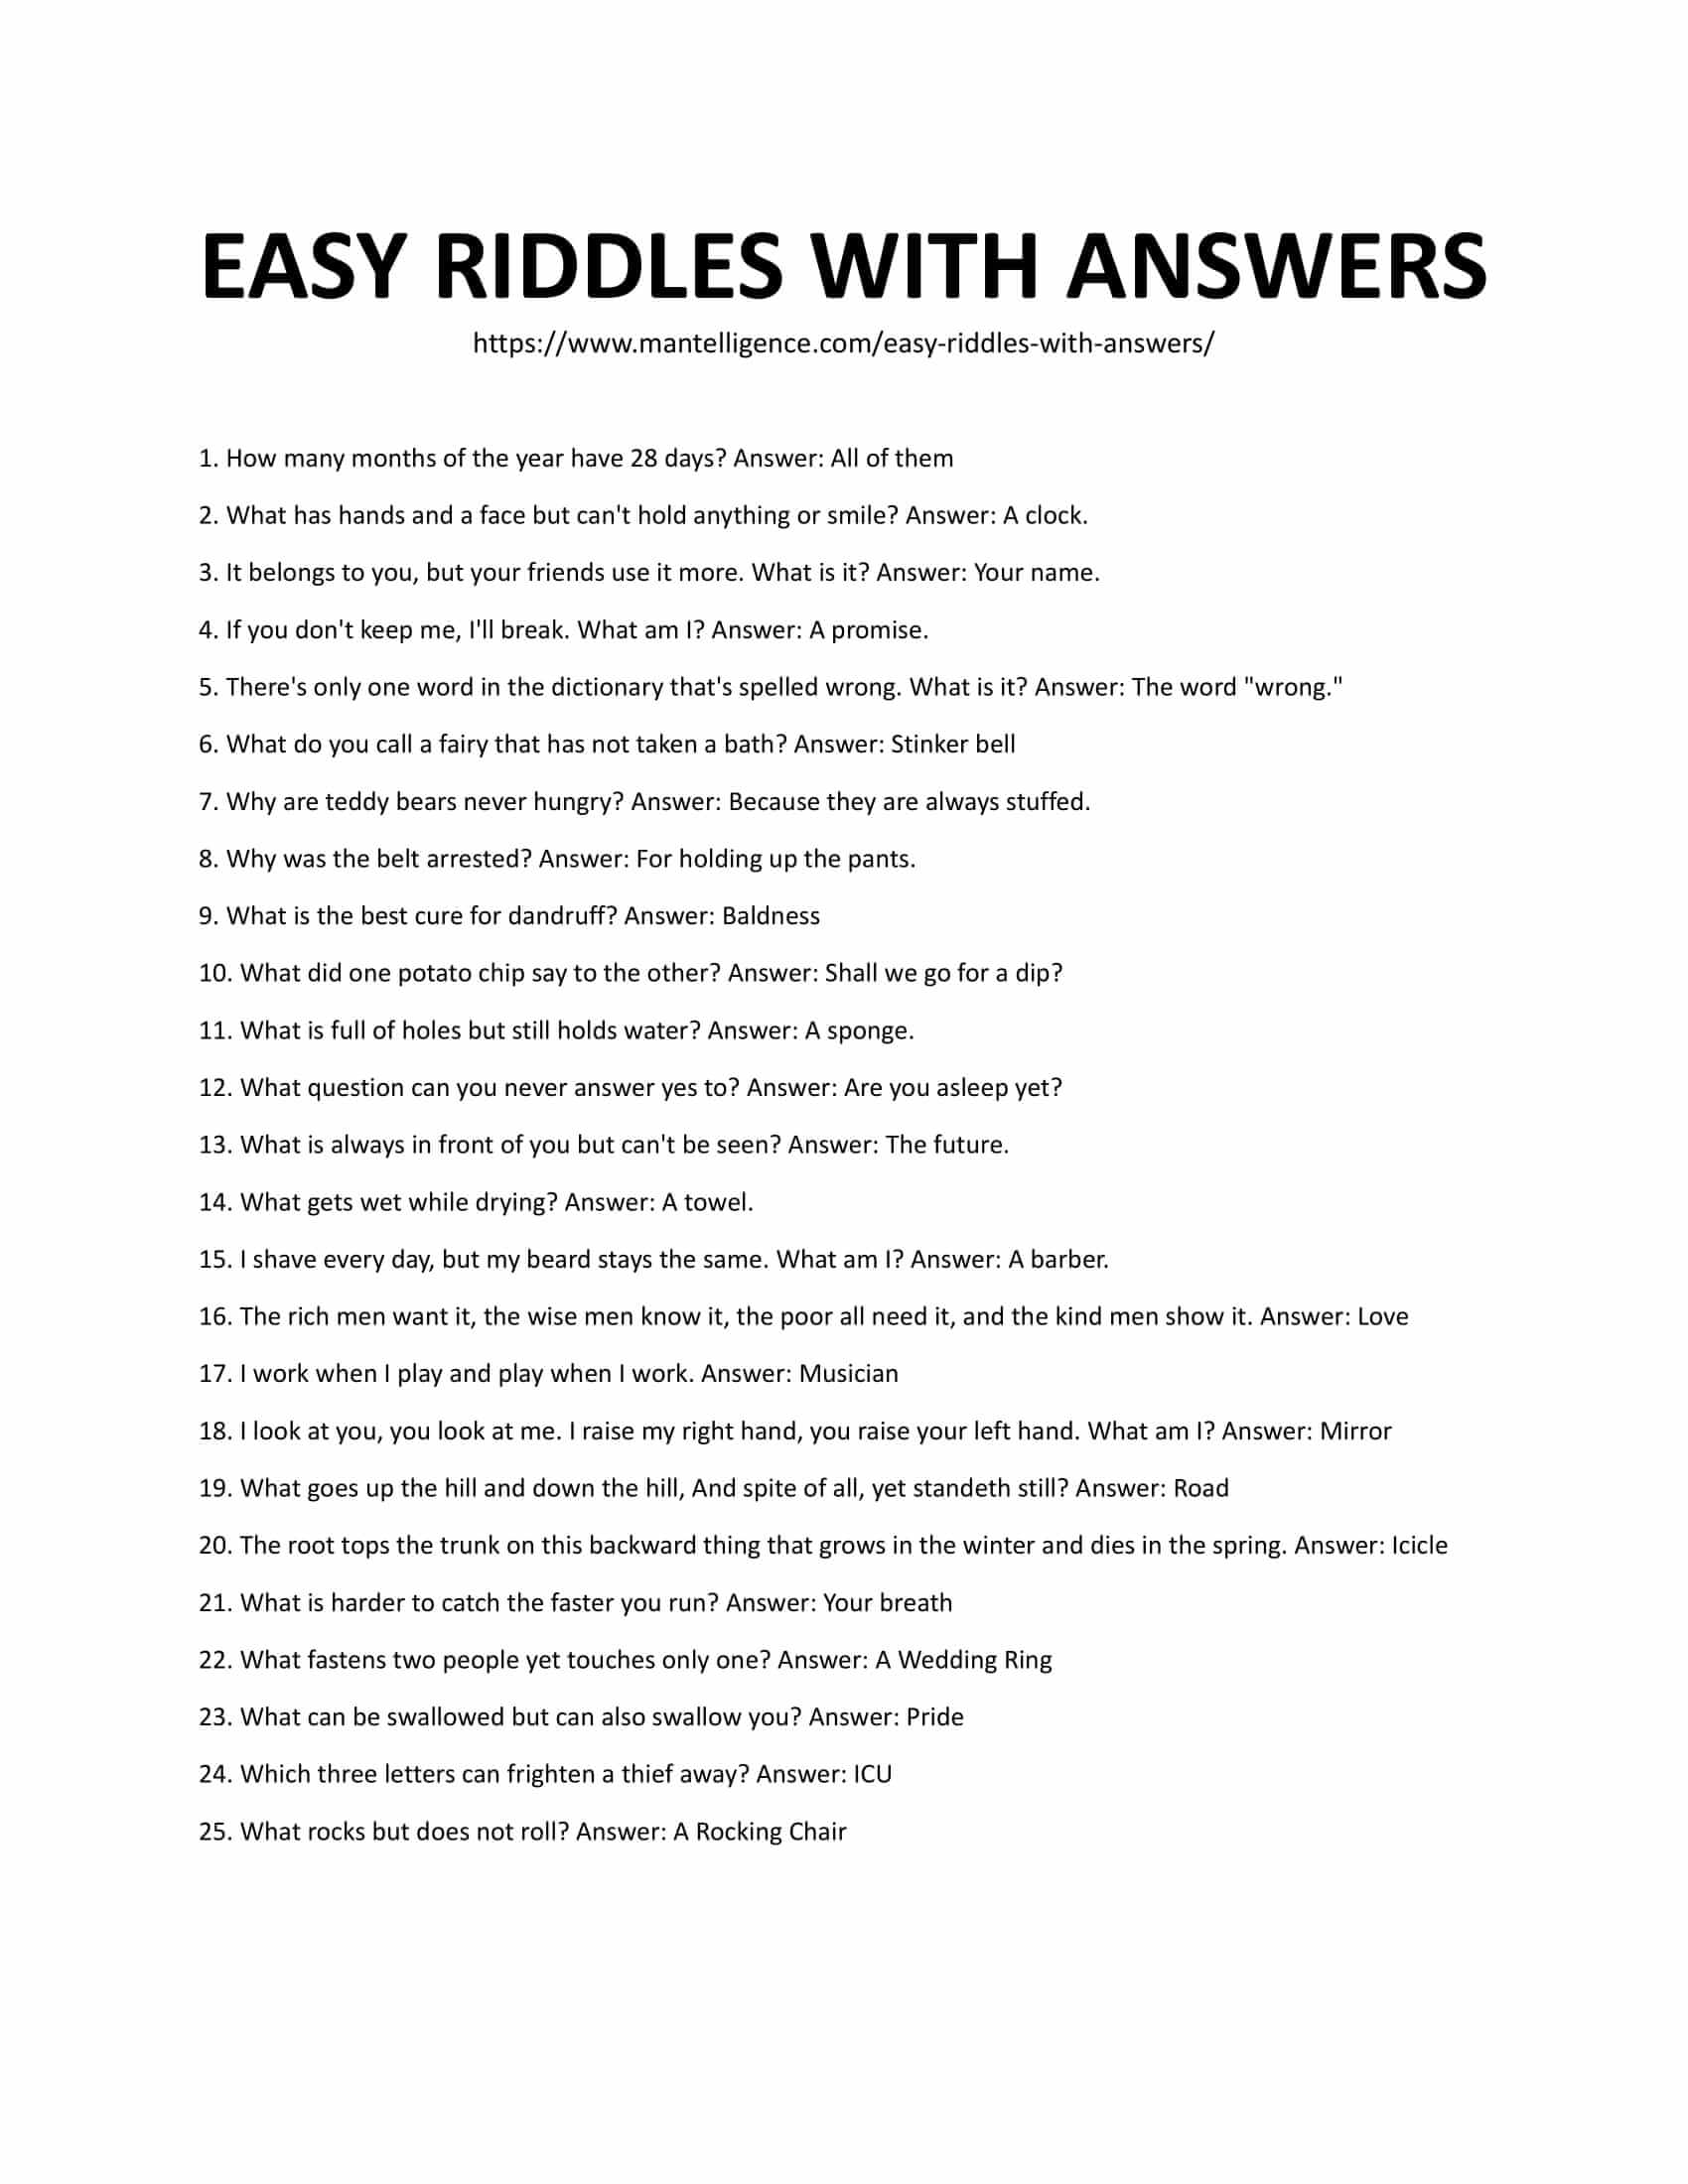 25-easy-riddles-with-answers-see-a-really-fun-list-of-questions-2022